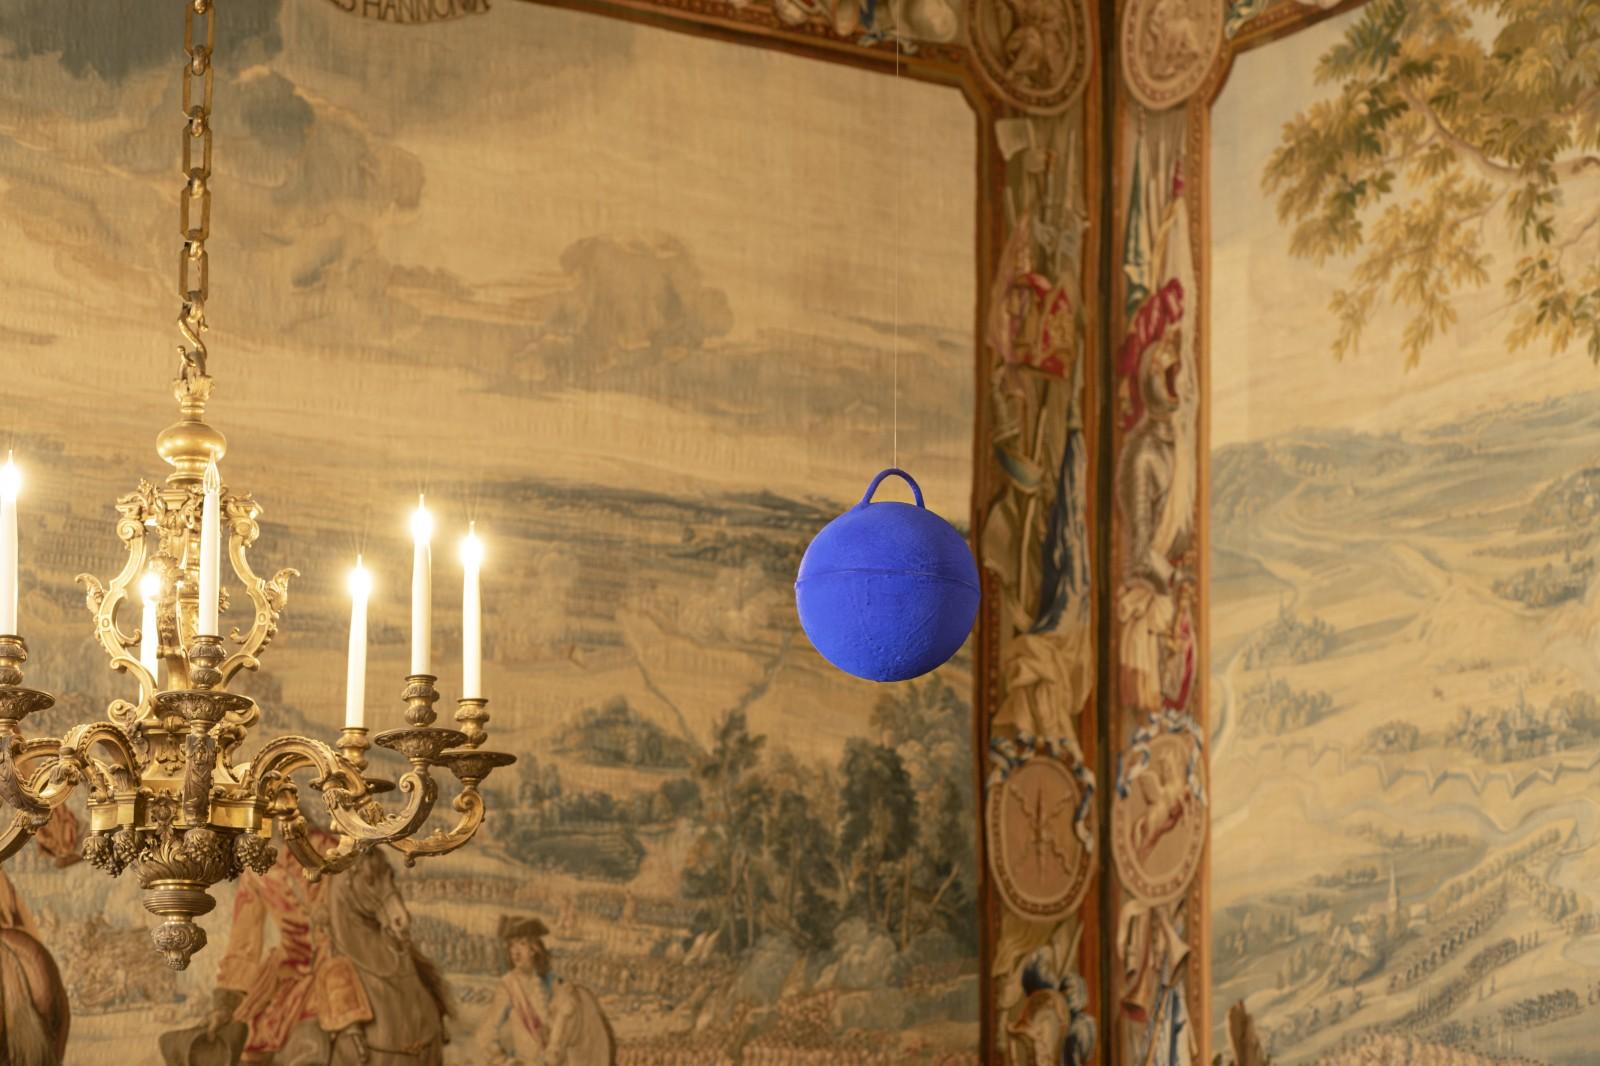 View of the exhibition "Yves Klein", Blenheim Palace, 2018 (RP 23 I)